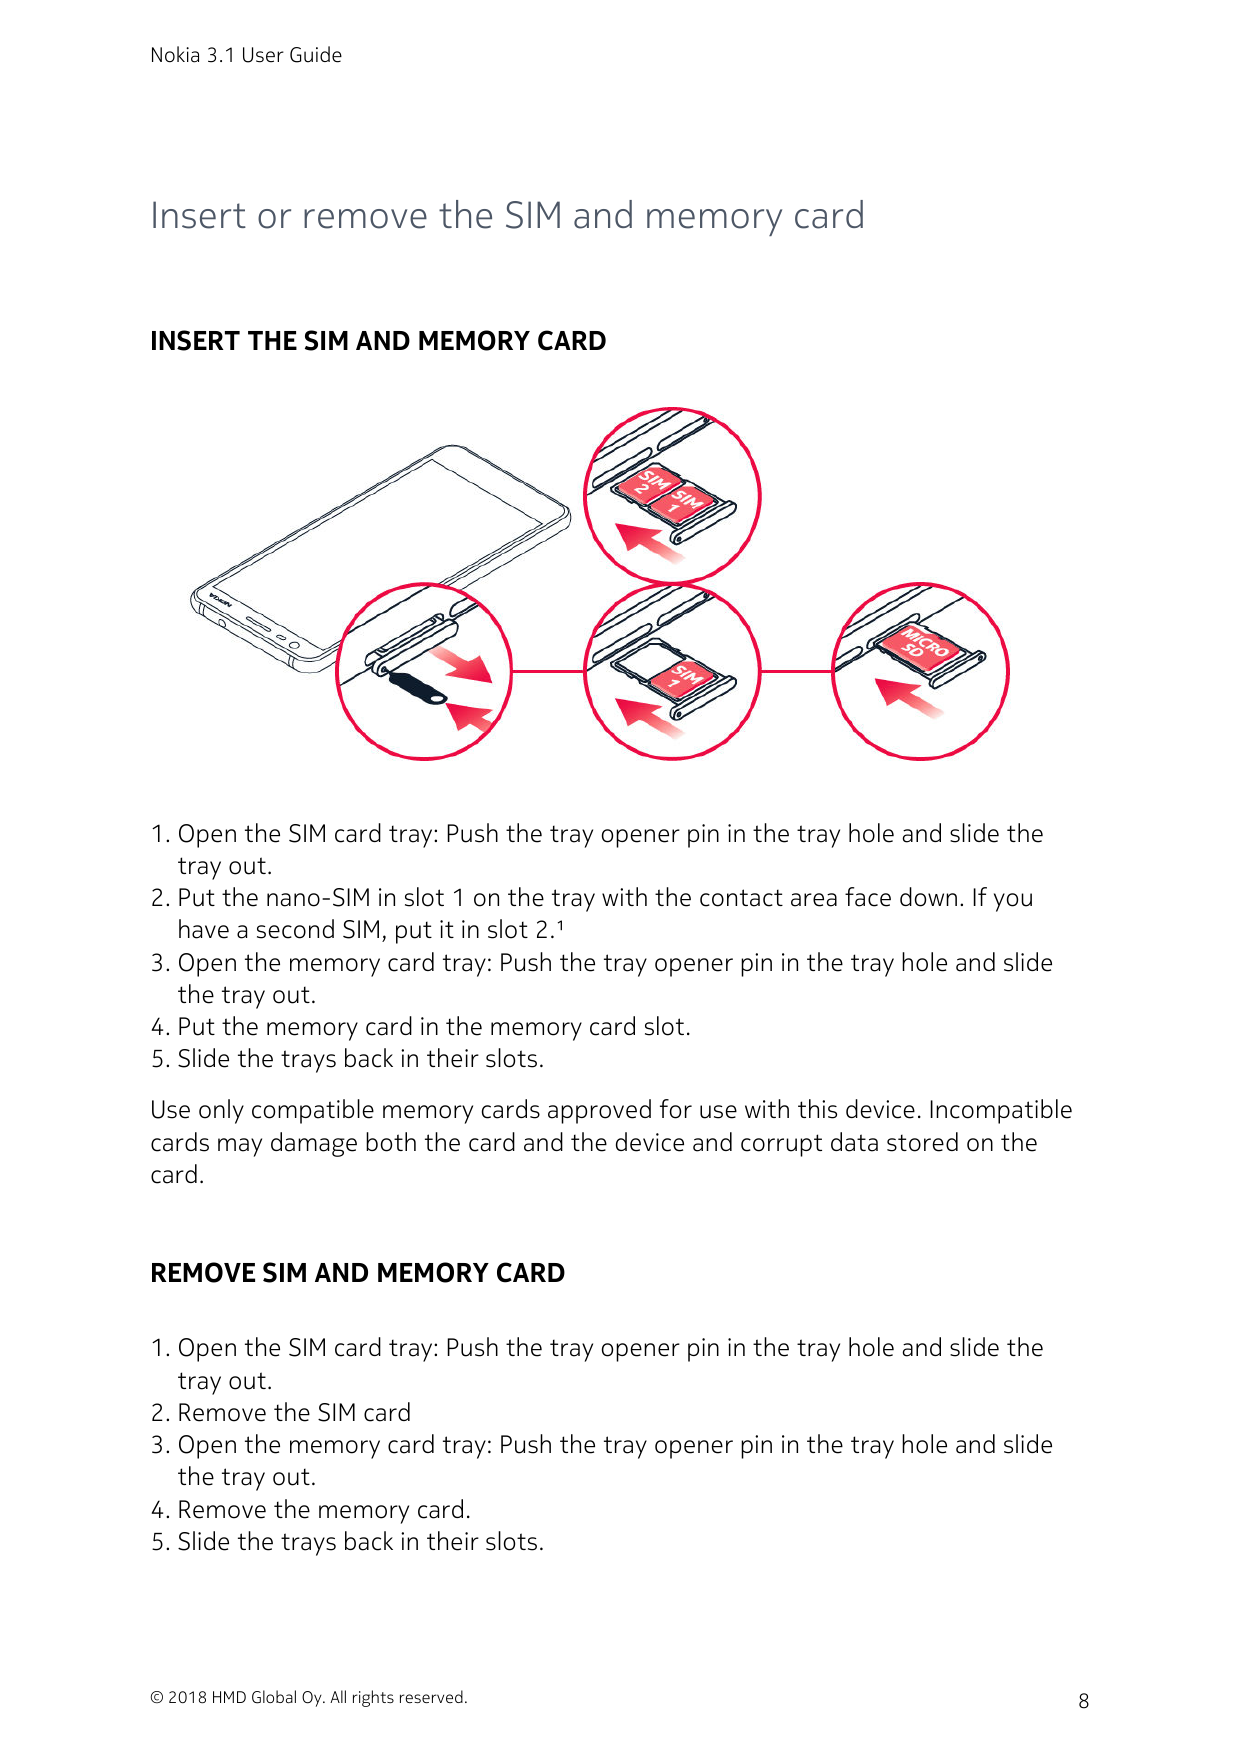 Nokia 3.1 User GuideInsert or remove the SIM and memory cardINSERT THE SIM AND MEMORY CARD1. Open the SIM card tray: Push the tr